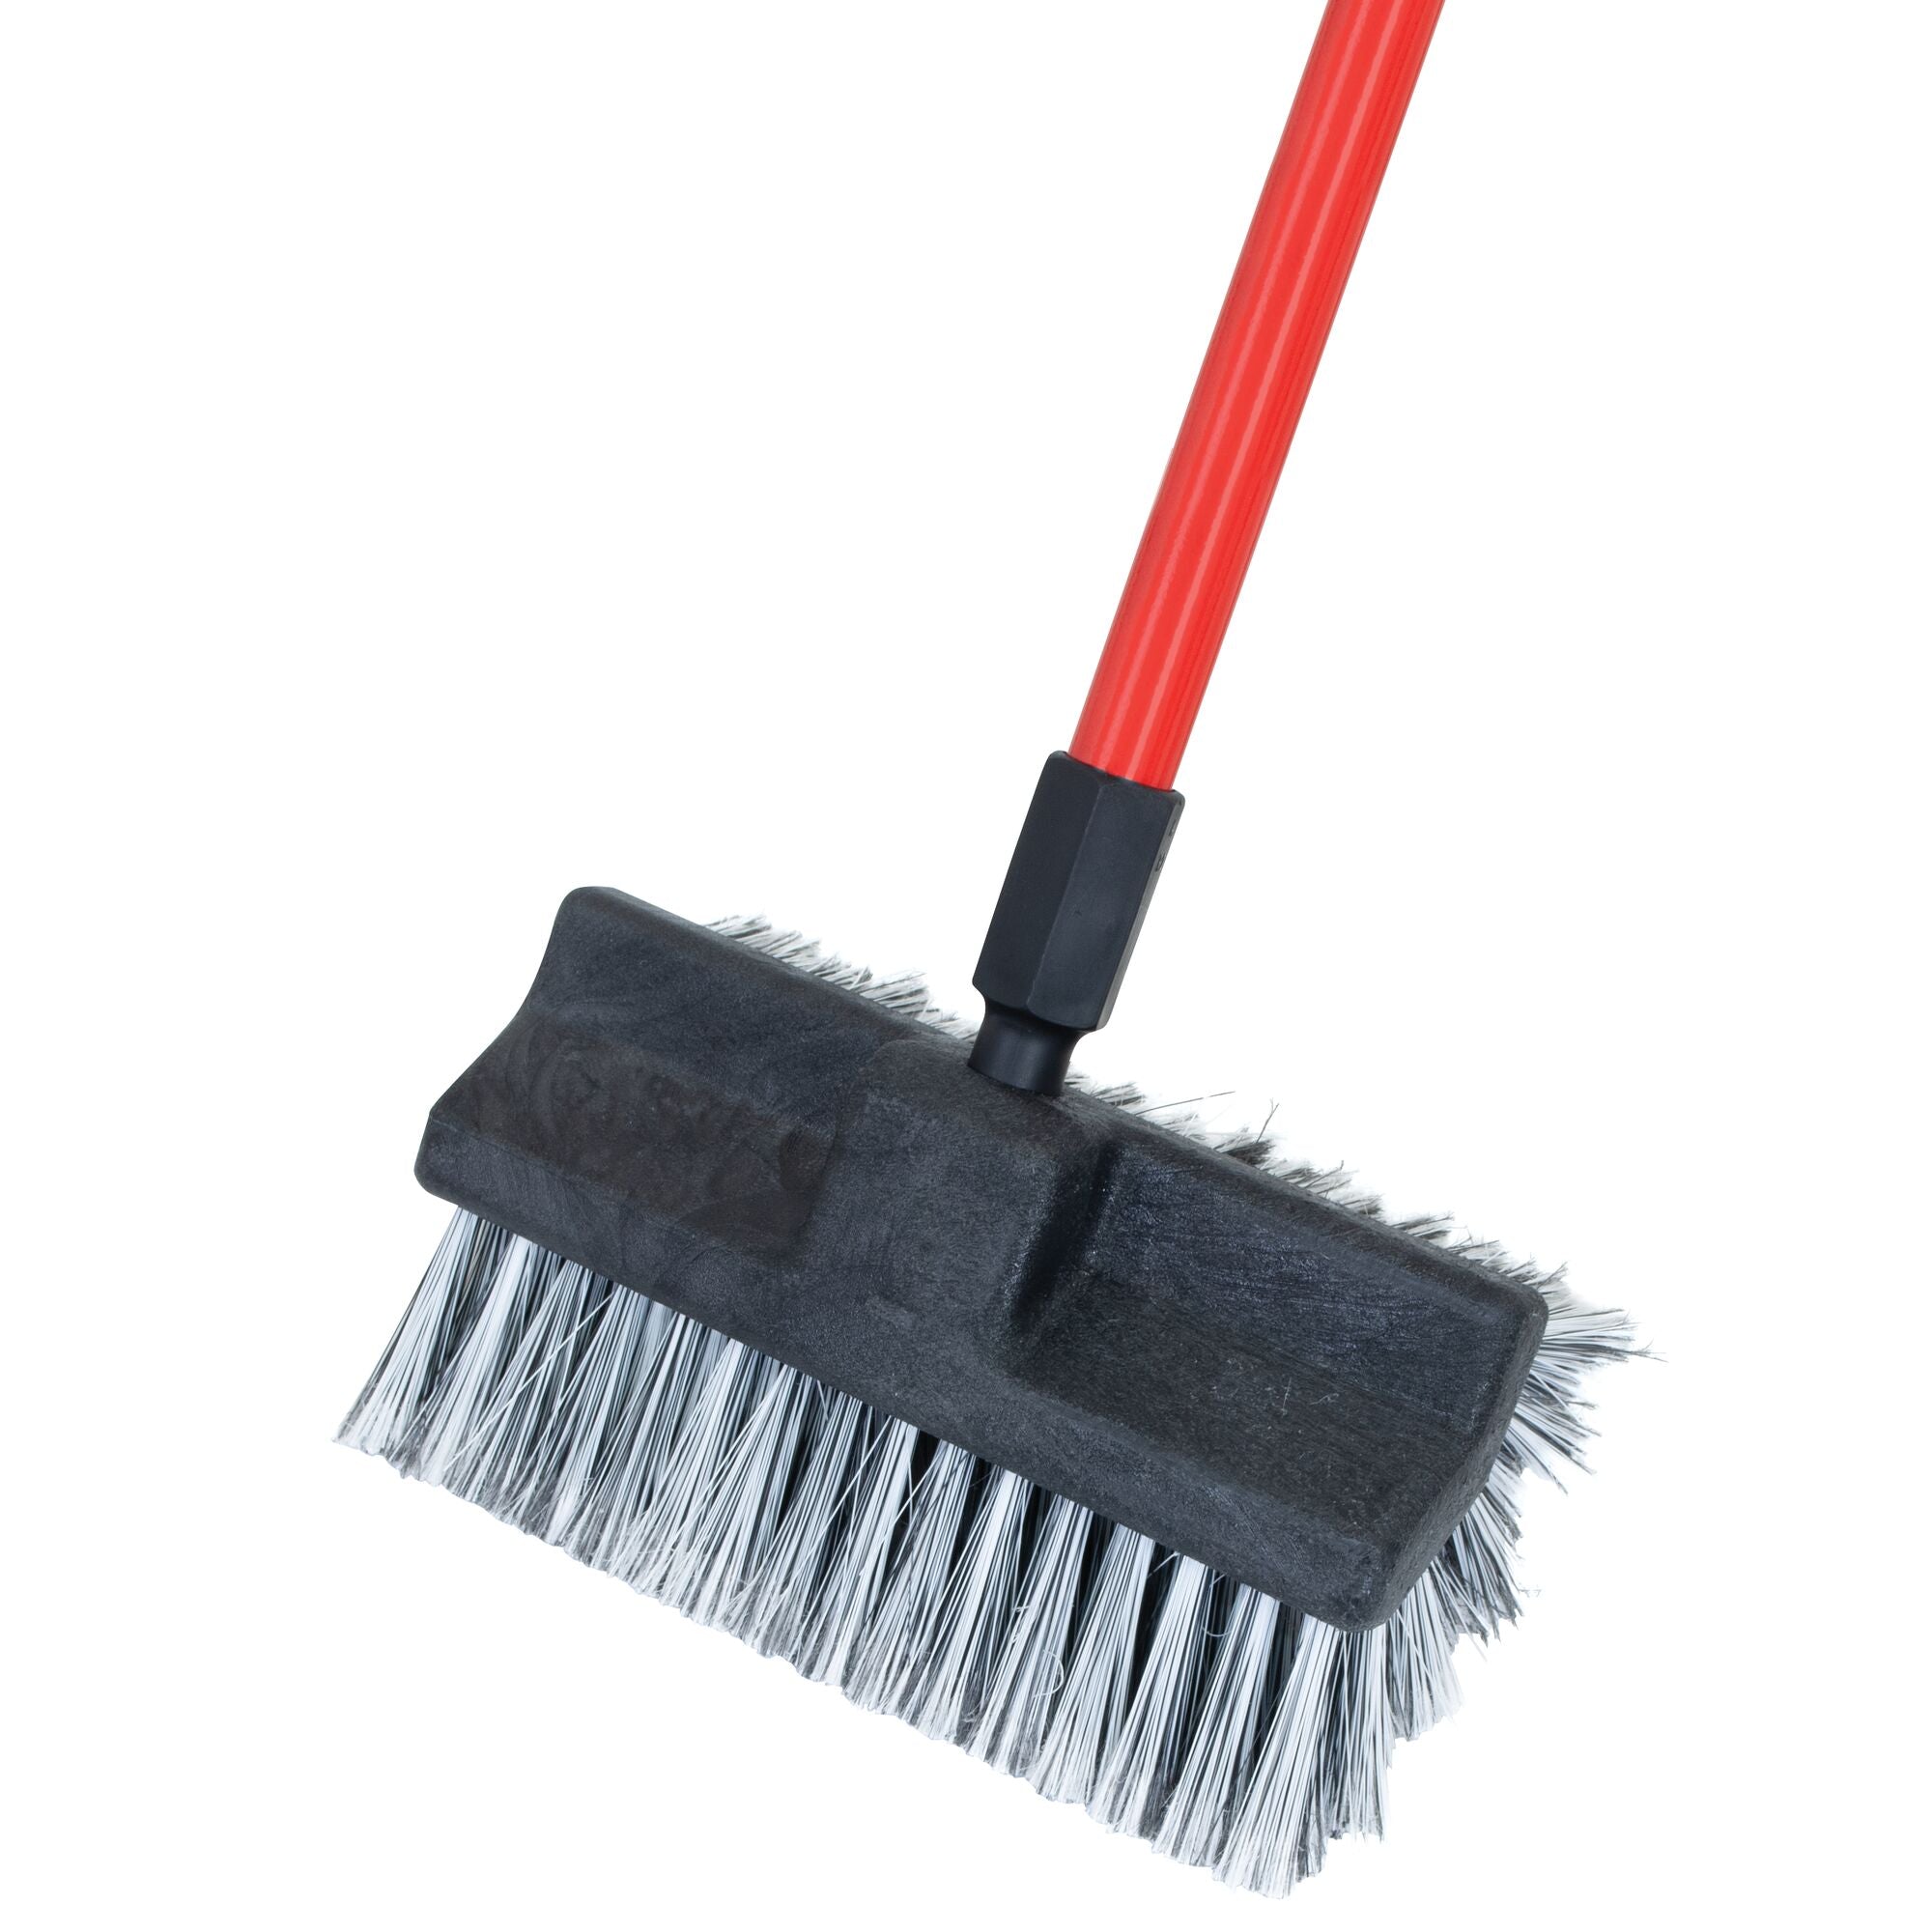 10 inch all-surface wash brush multi-level head with polystyrene bristles